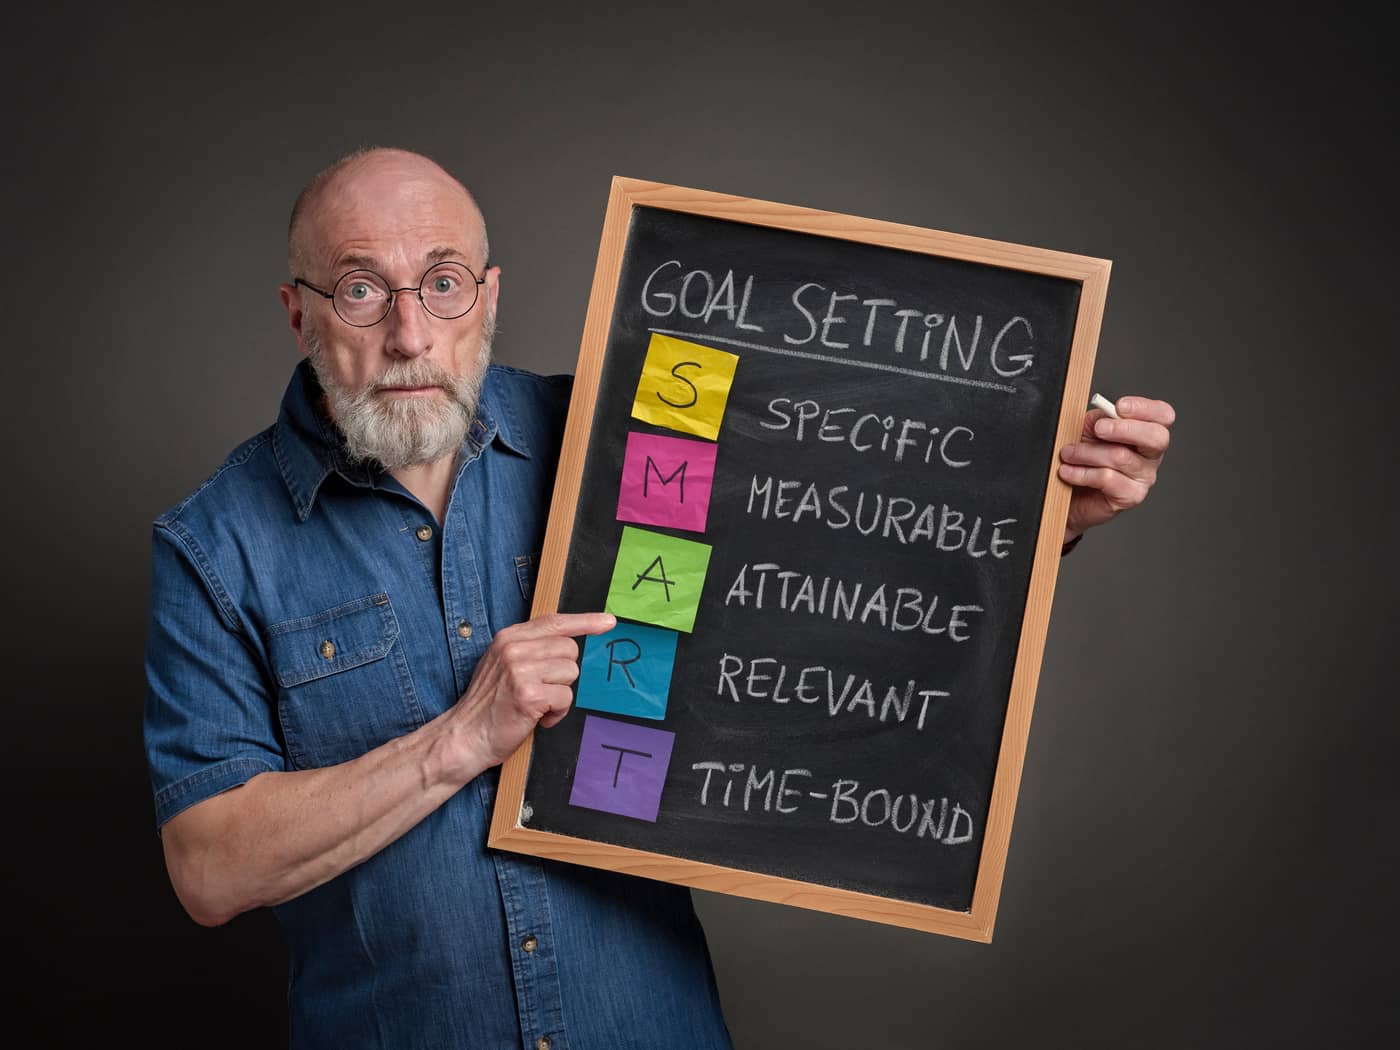 A senior man holding a sign that says "Goal Setting: S-Specific, M-Measurable, A-Attainable, R-Relevant, and T-Timebound"